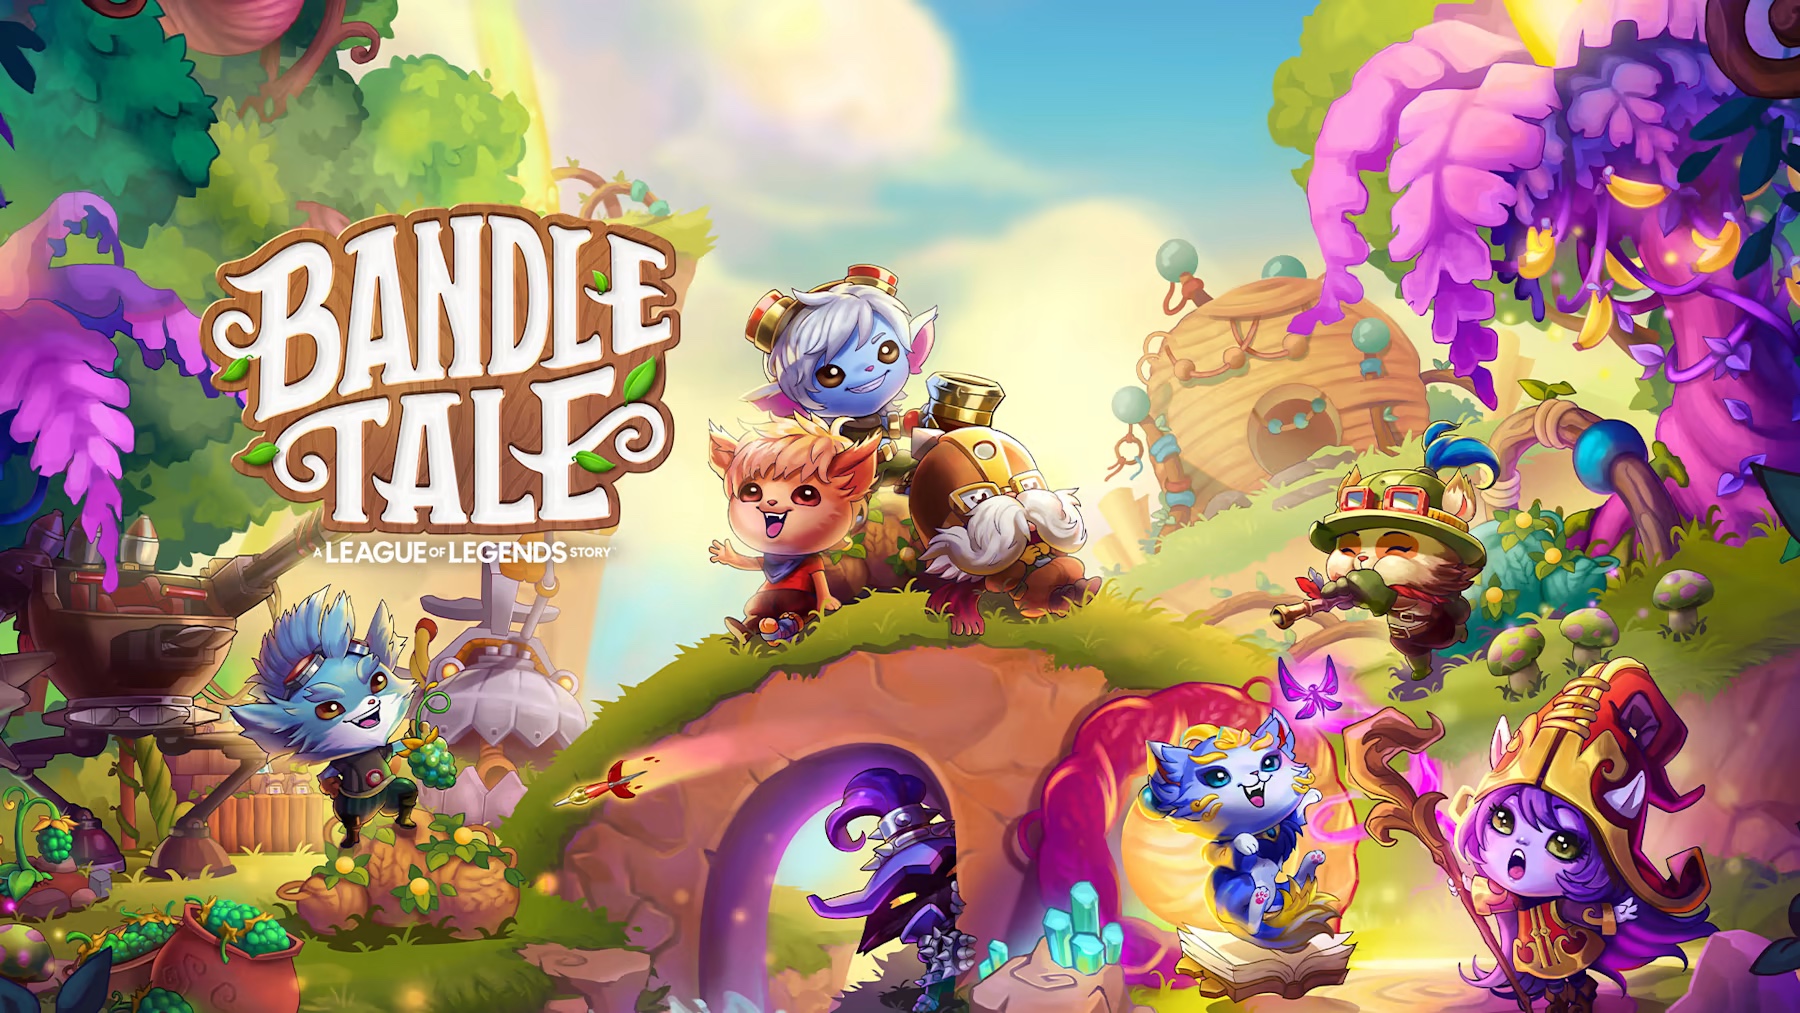 Bandle-Tale-A-League-of-Legends-Story-switch-review-main.jpg